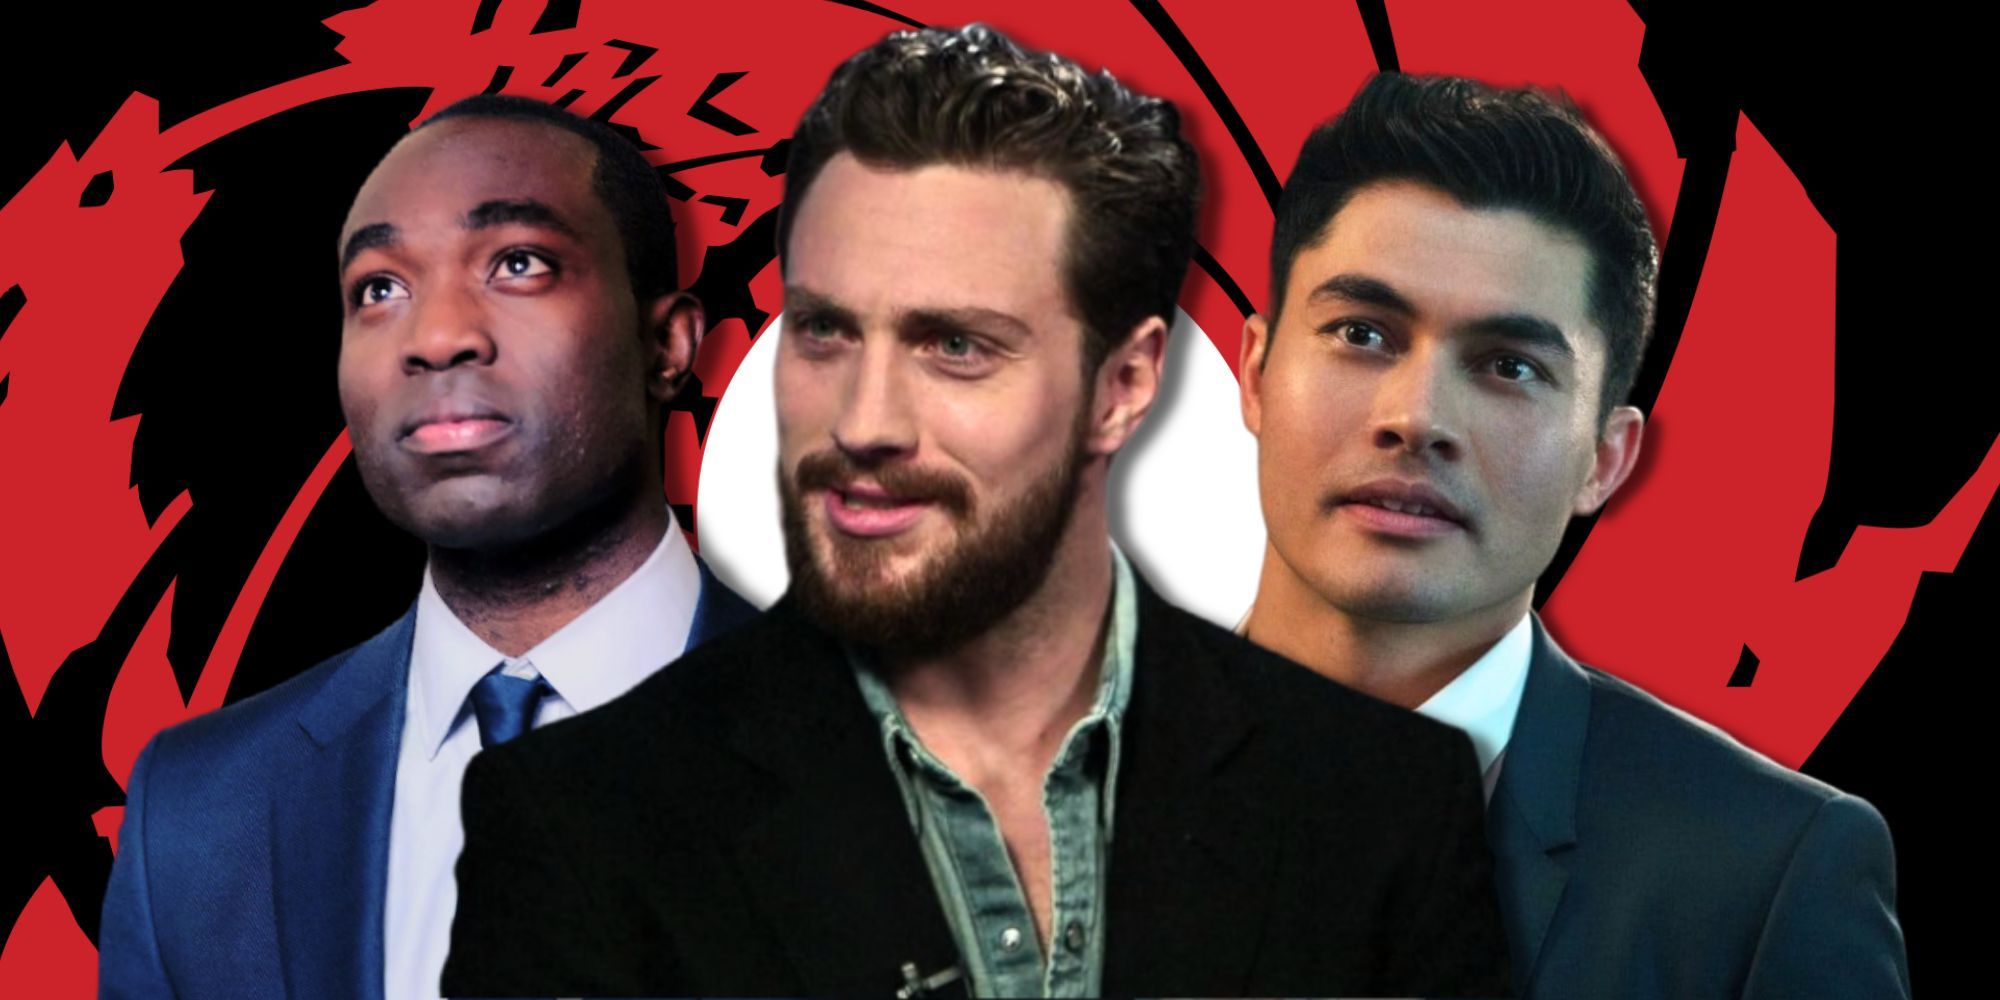 Composite image of Paapa Essiedu, Aaron Taylor-Johnson, and Henry Golding